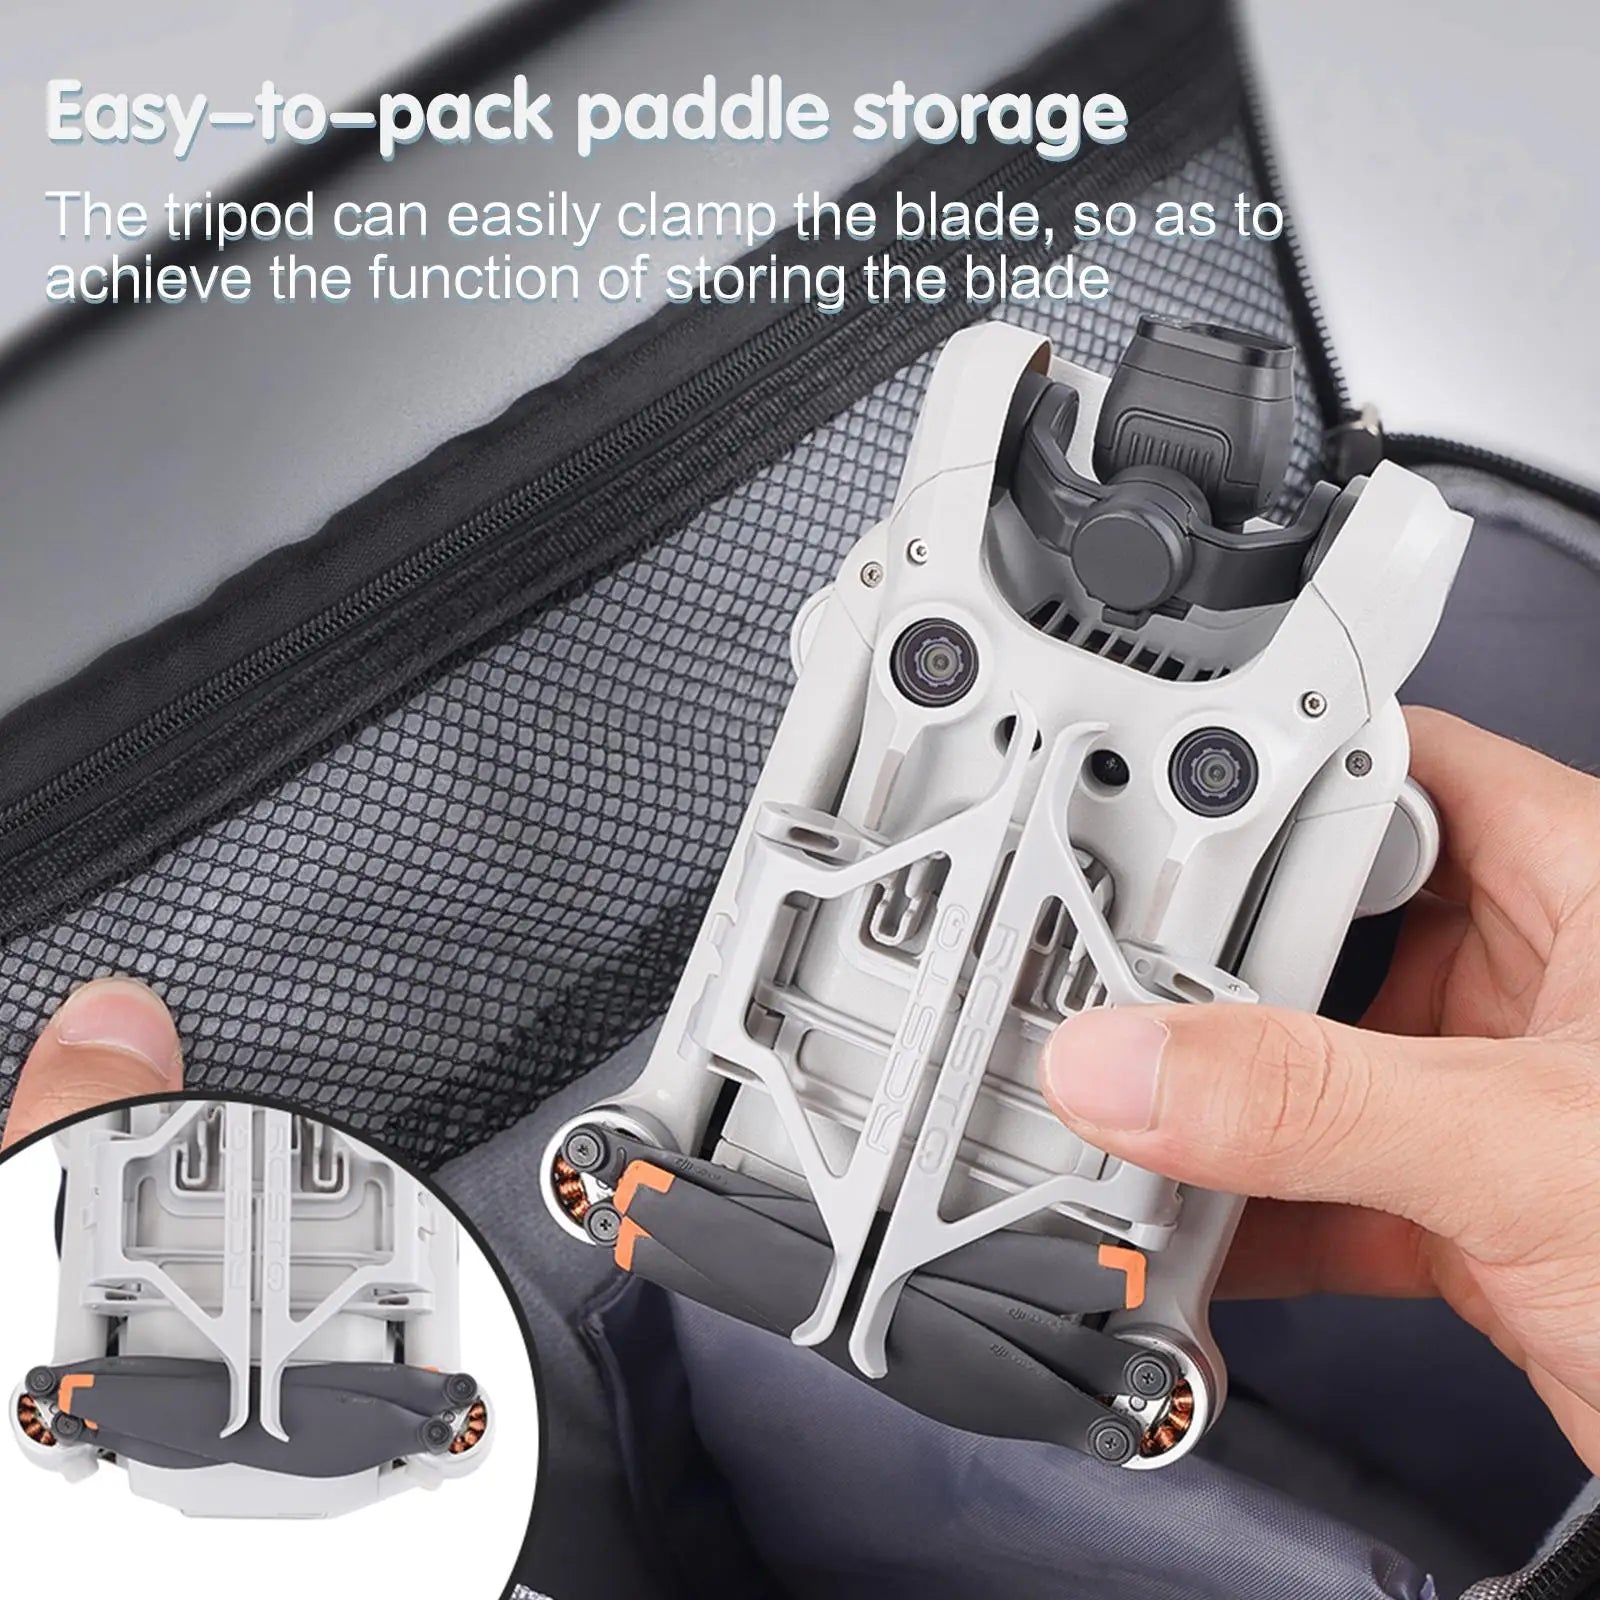 easy_io-pack paddle storage The tripod can easily clamp the blade, so as to